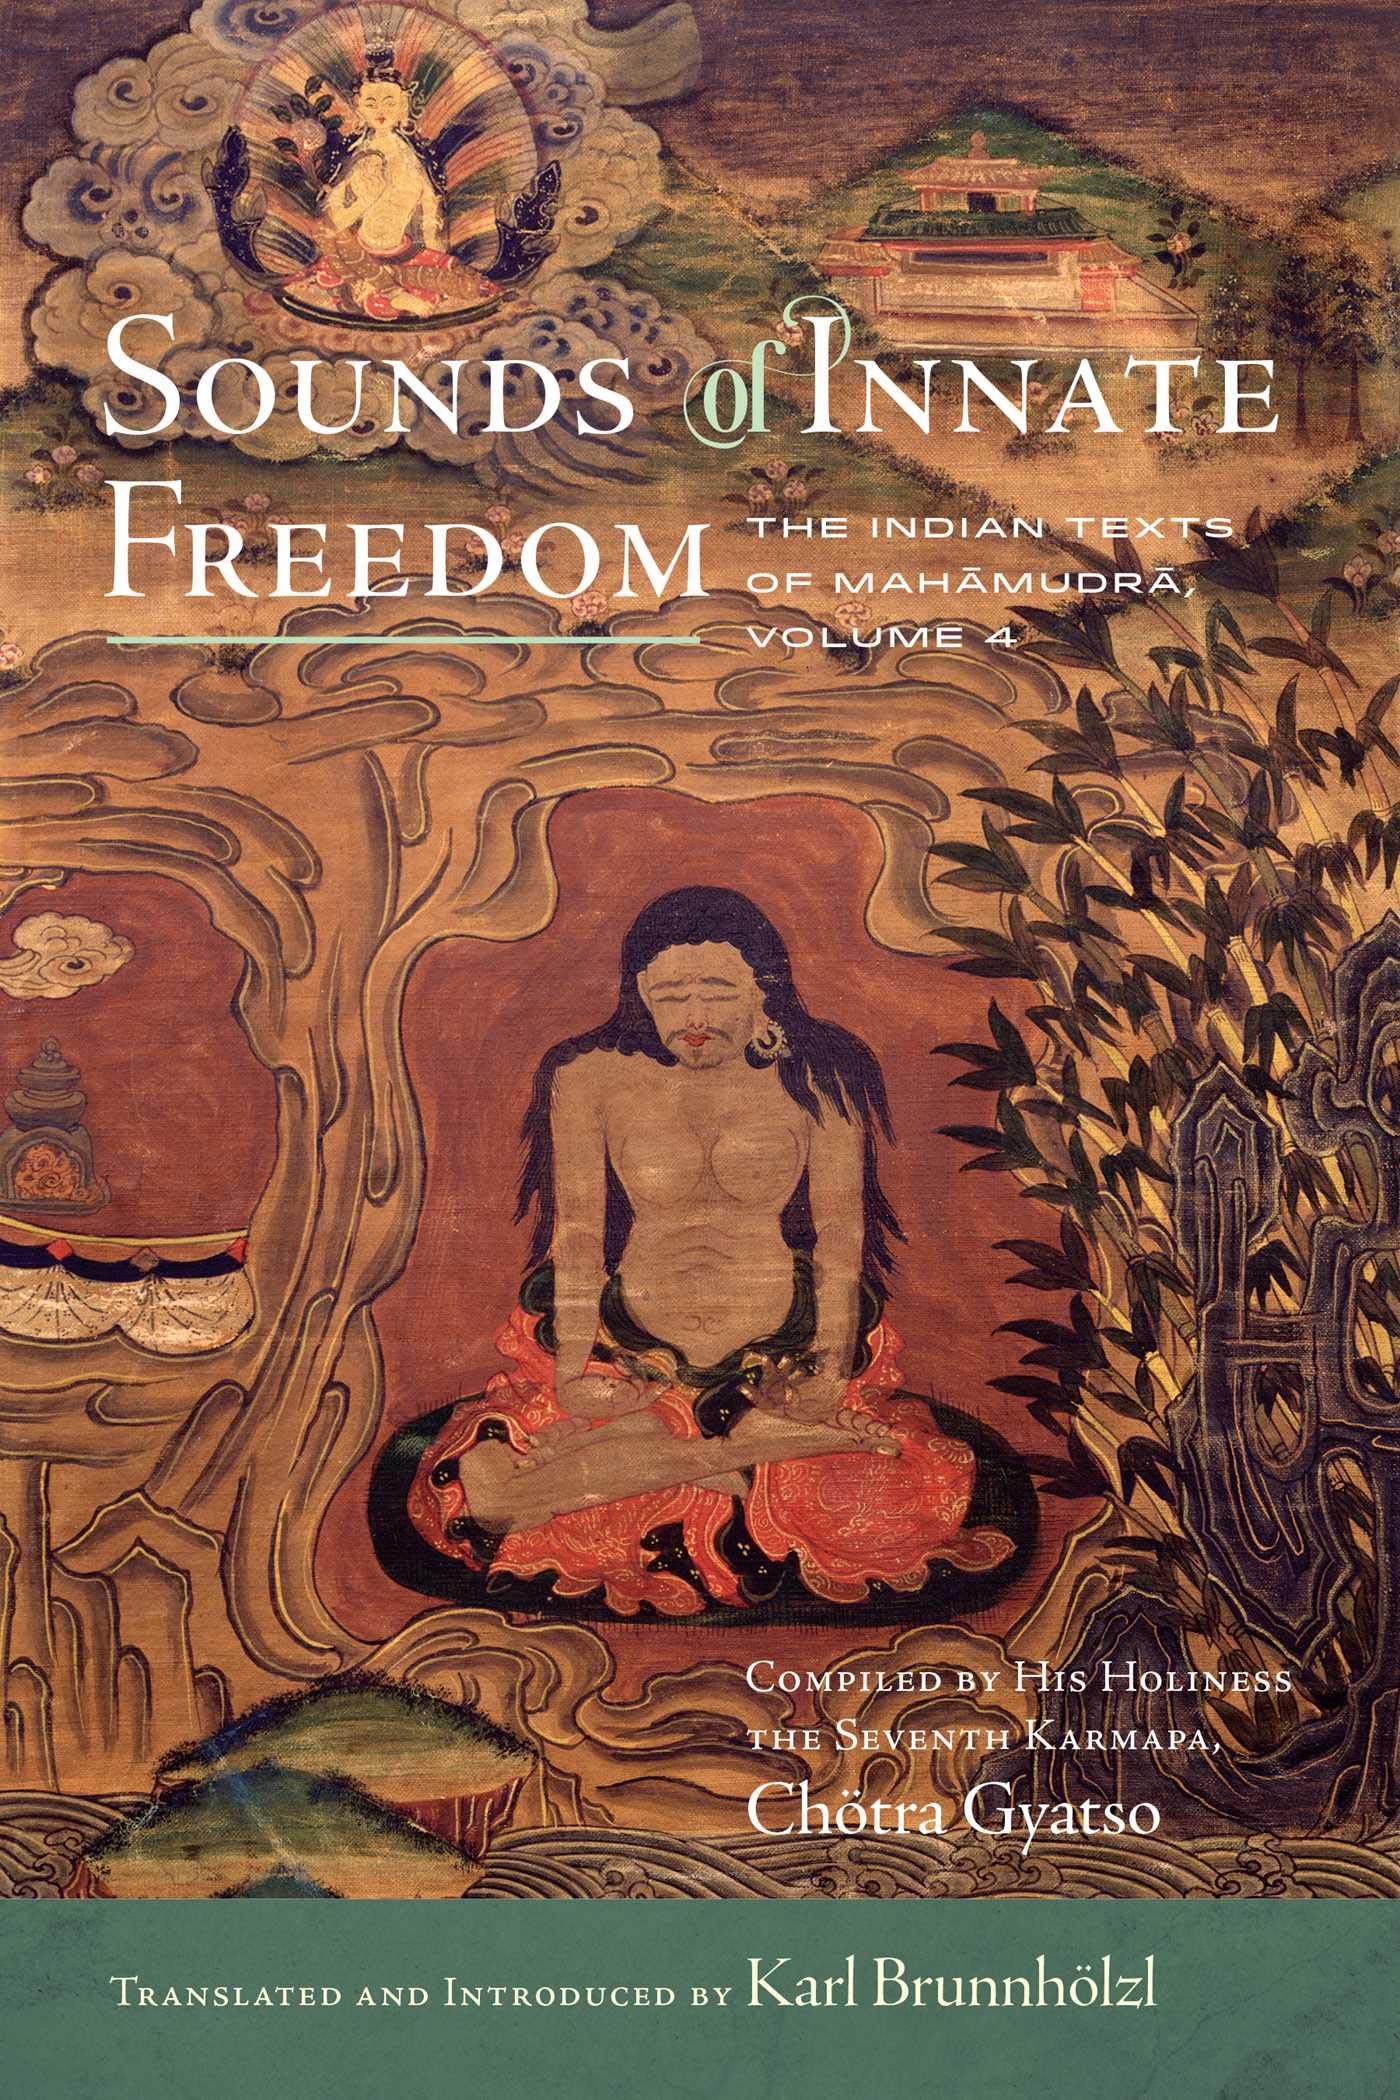 Sounds of Innate Freedom: The Indian Texts of Mahamudra, Volume 4 (4)